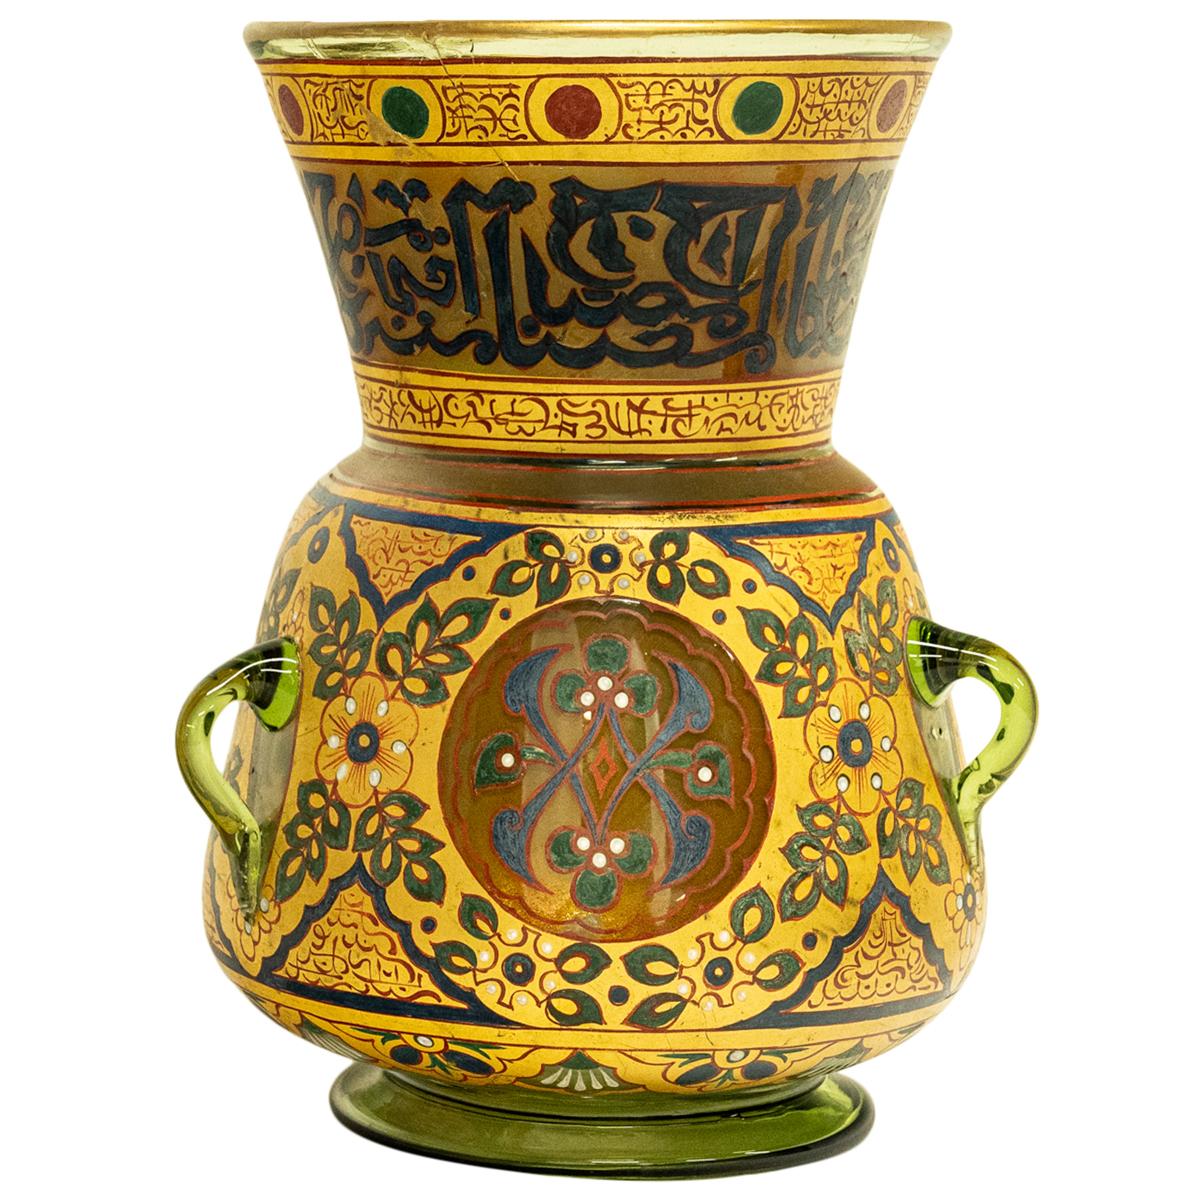 Antique French Islamic Glass Enamel Gilt Mamluk Revival Mosque Lamp Brocard 1880 For Sale 1